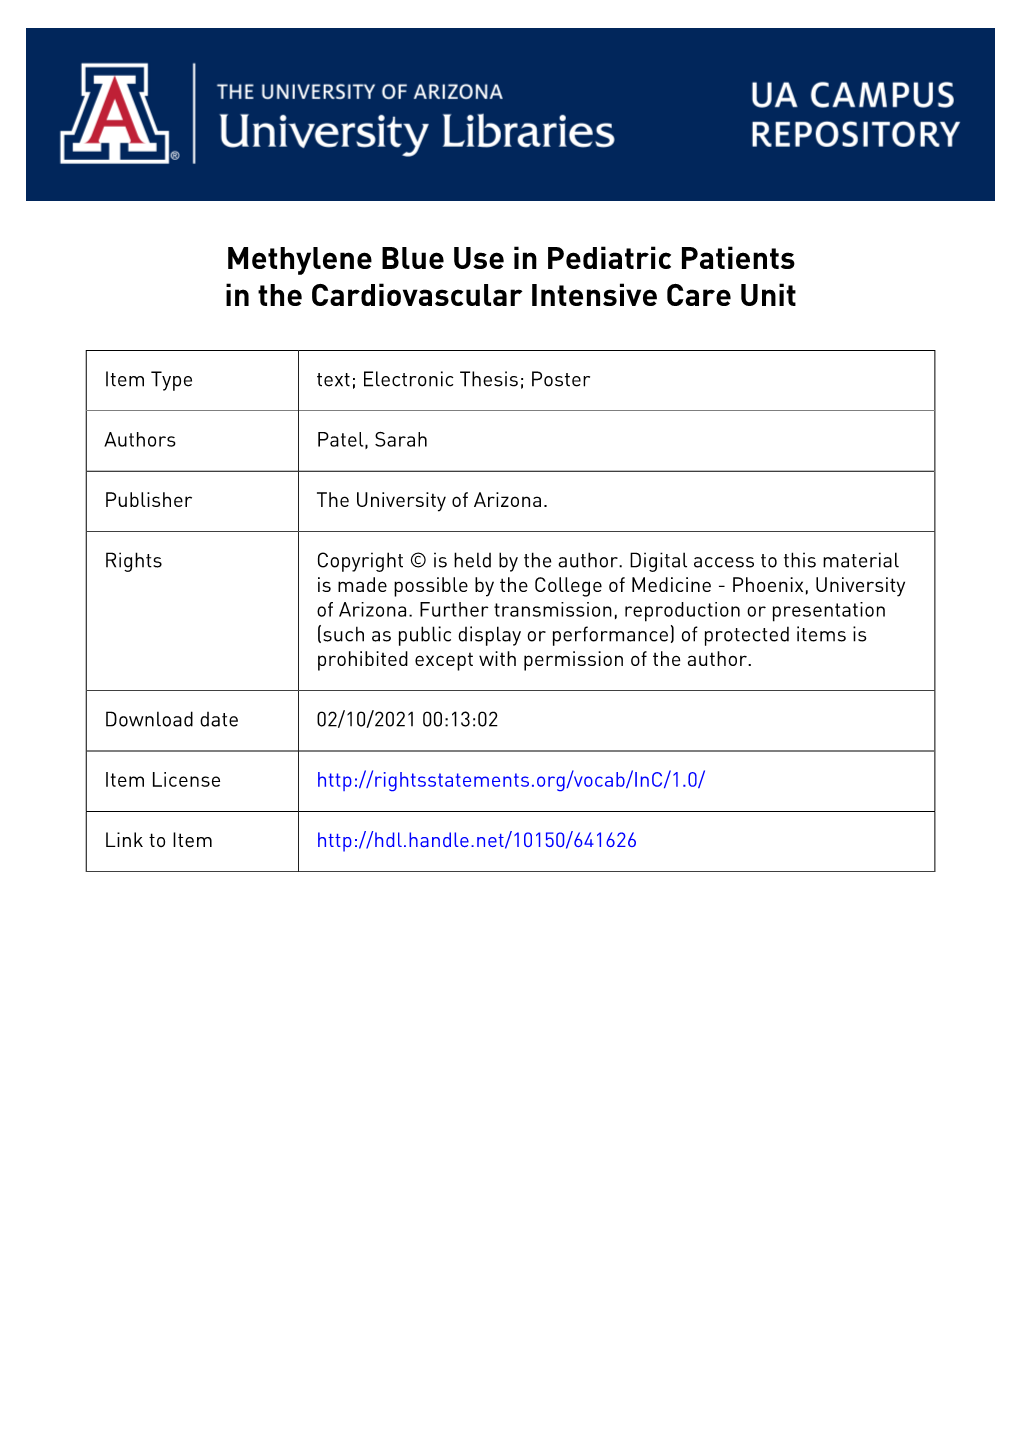 Methylene Blue Use in Pediatric Patients in the Cardiovascular Intensive Care Unit